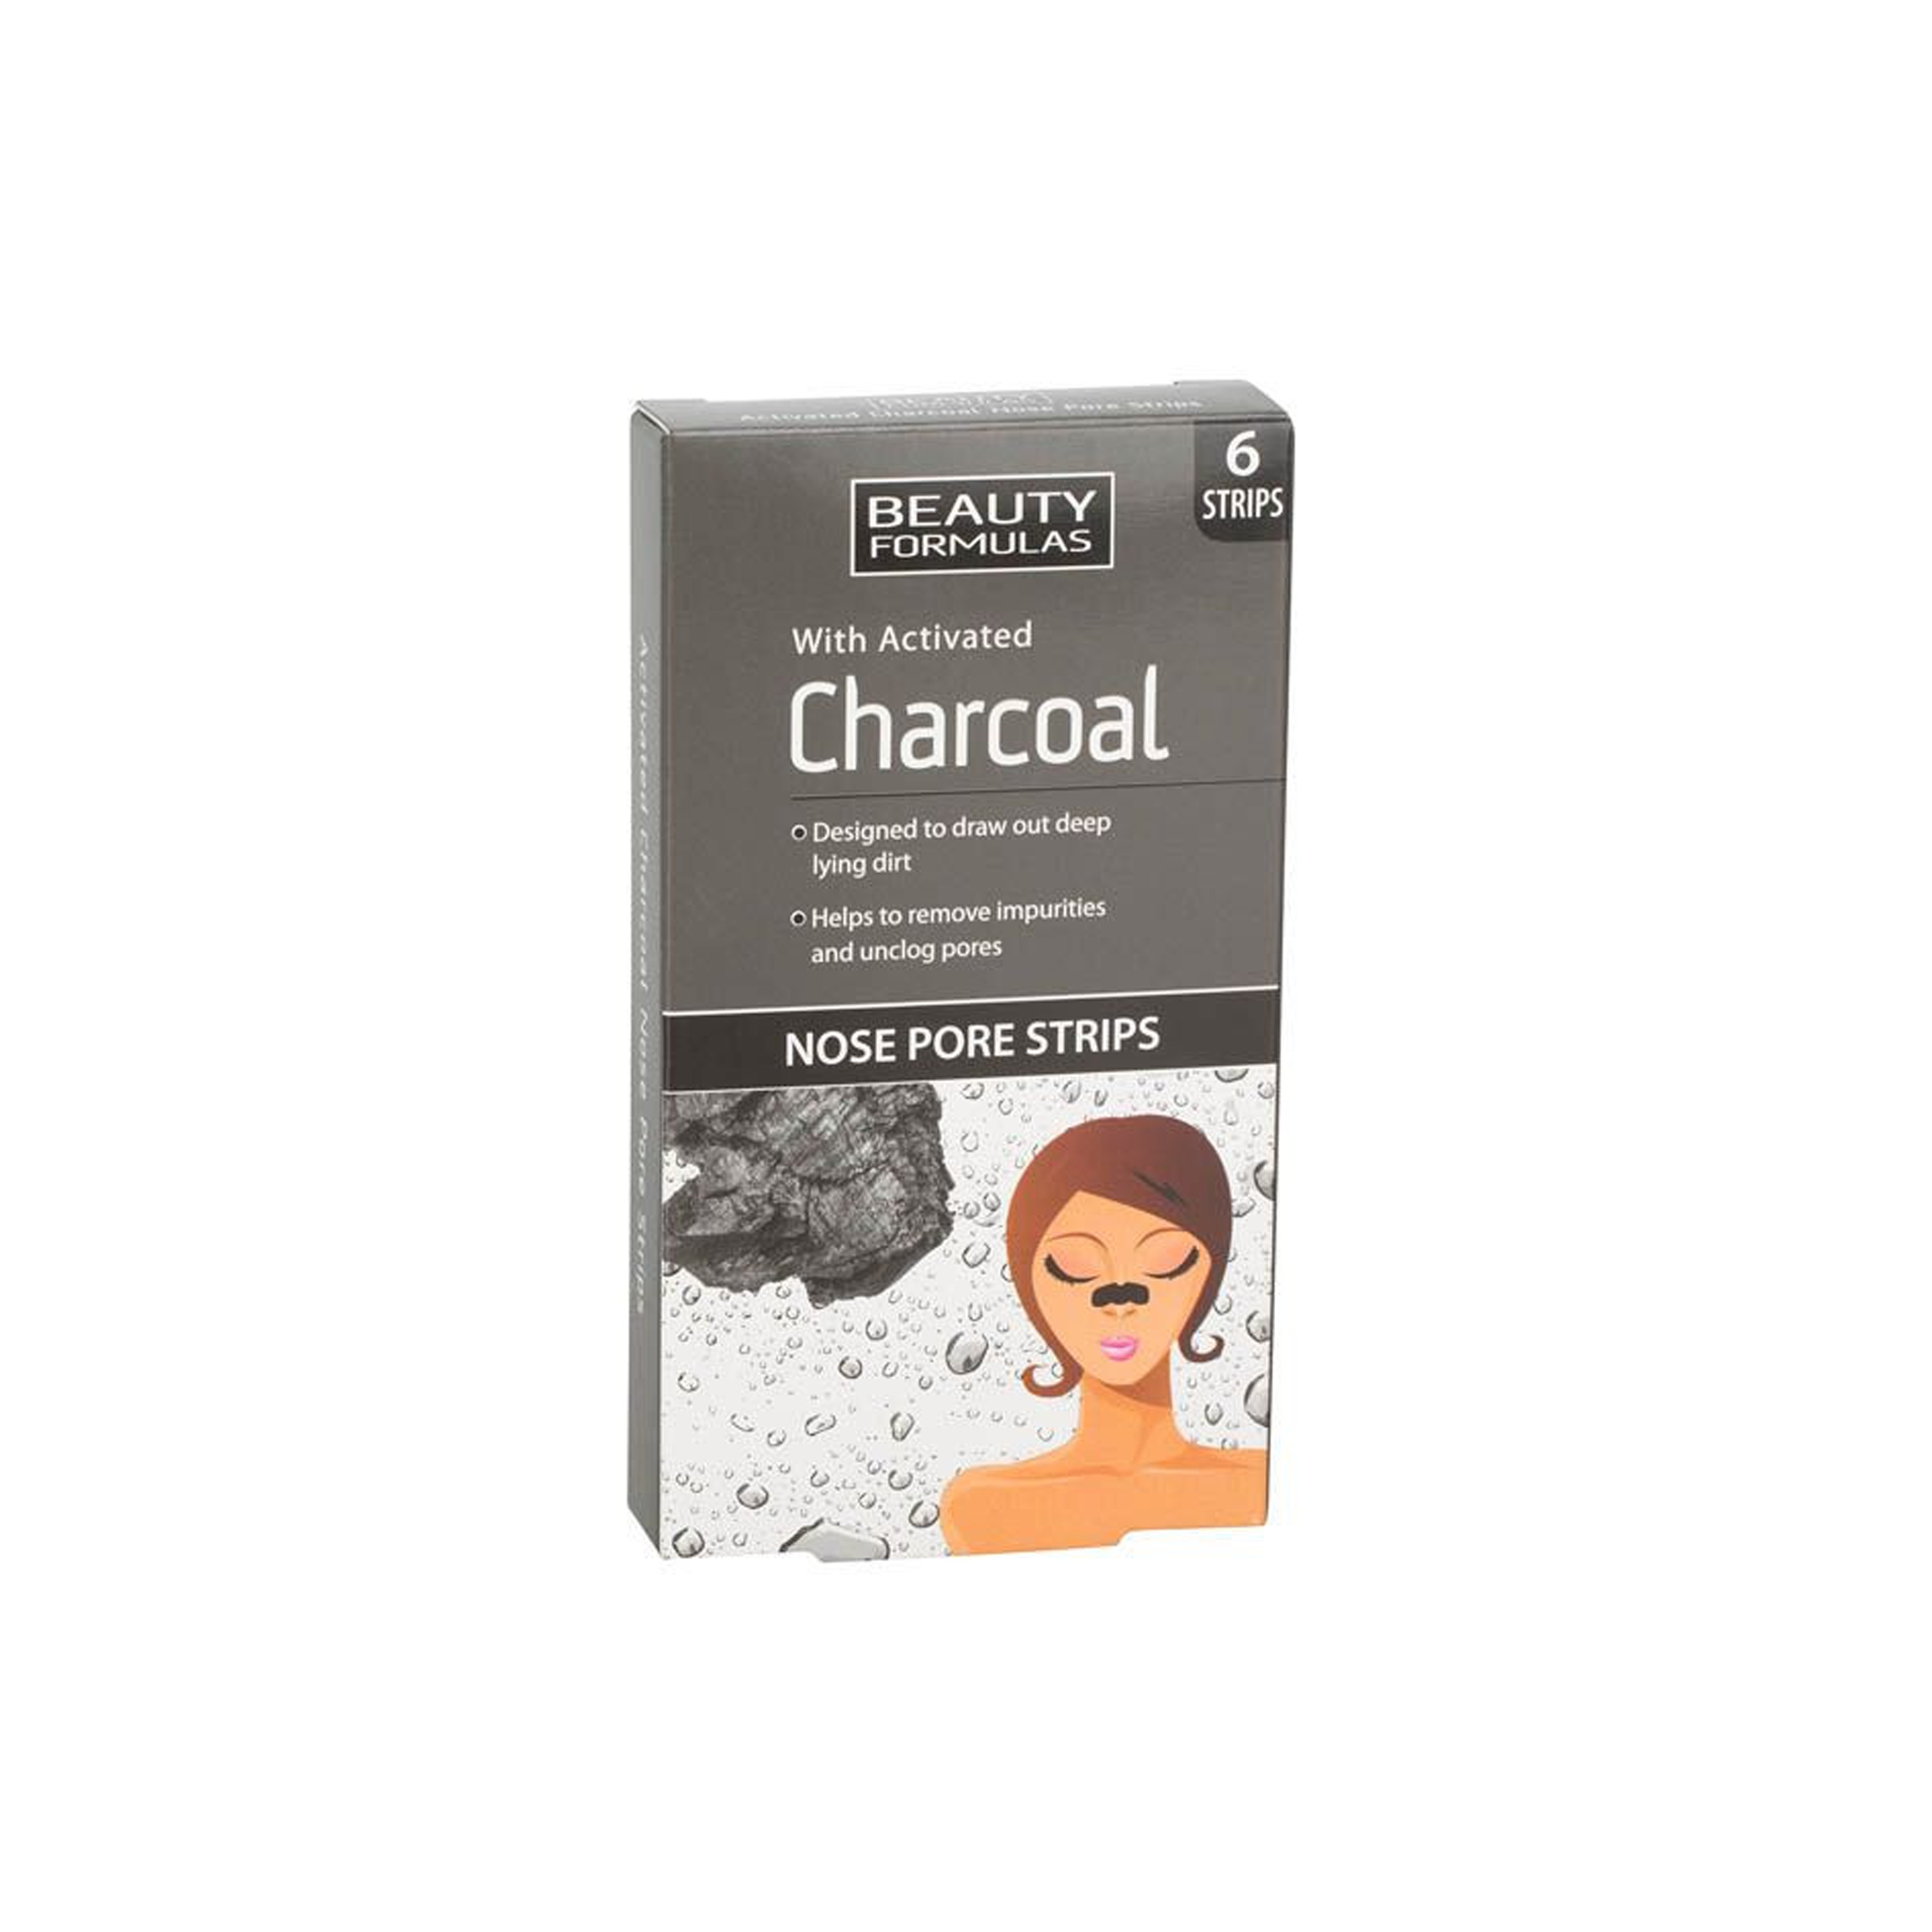 BF CHARCOAL NOSE PORE STRIPS 6S 12645